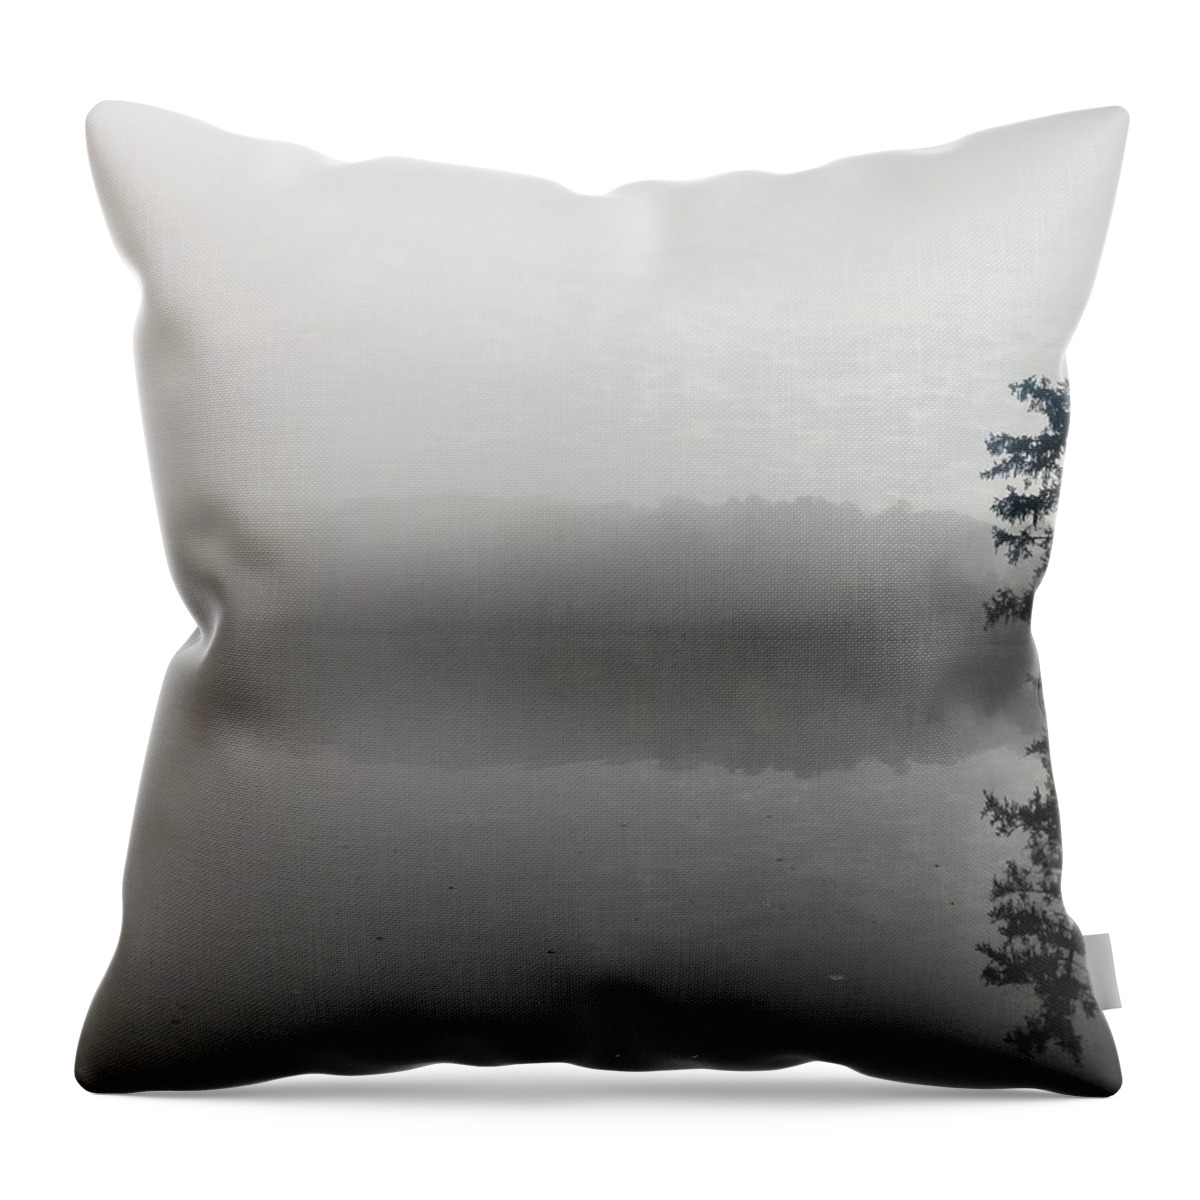  Throw Pillow featuring the photograph Foggy Morning Tree by Brad Nellis